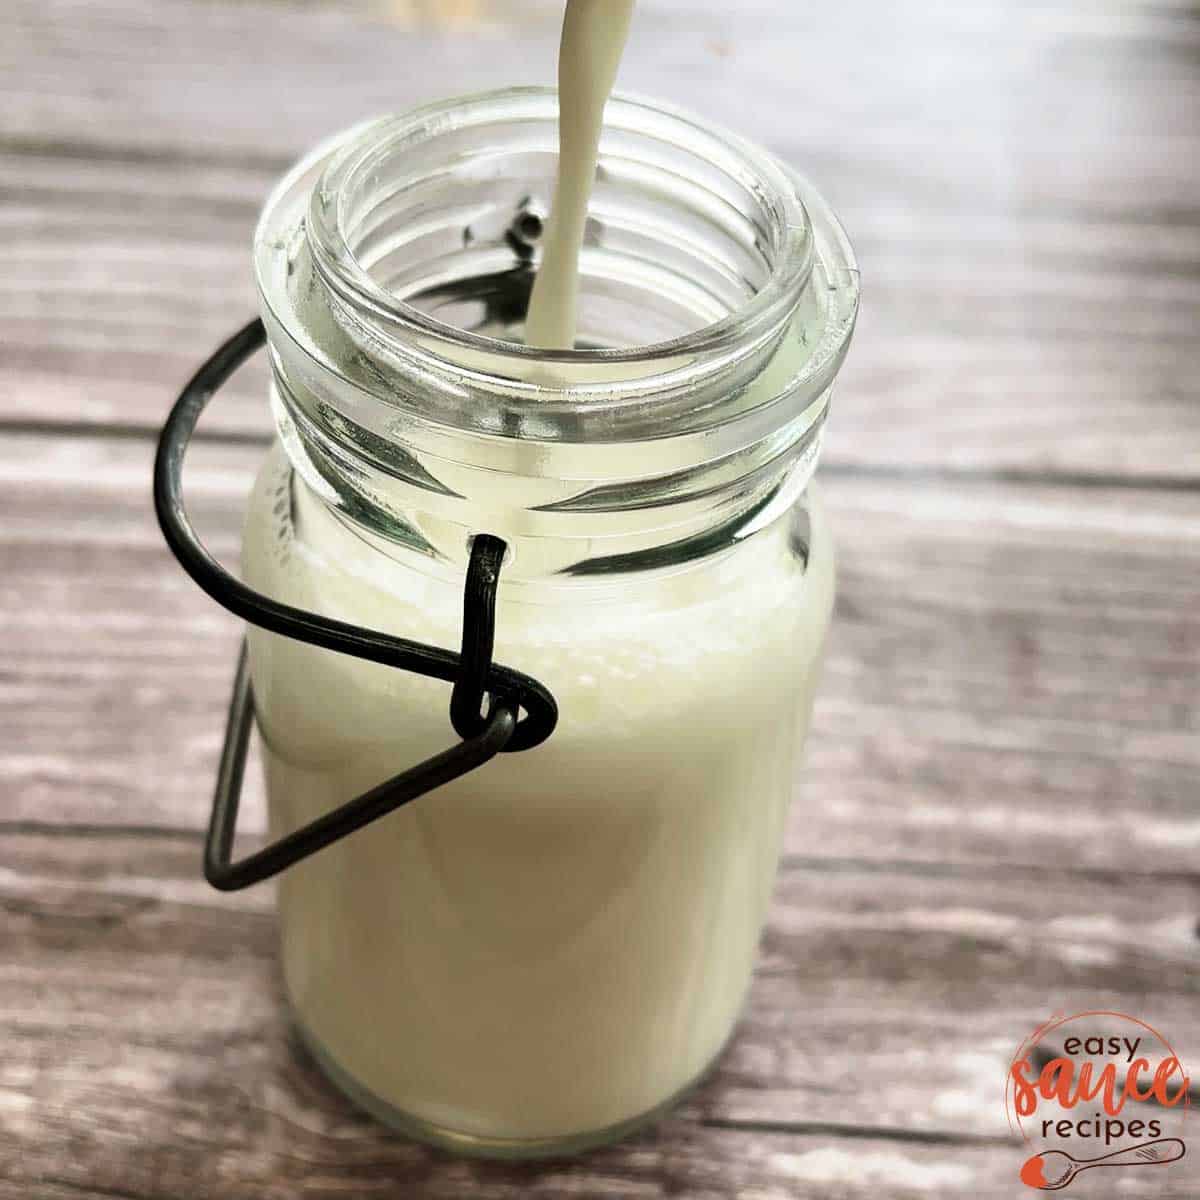 pouring buttermilk into a jar